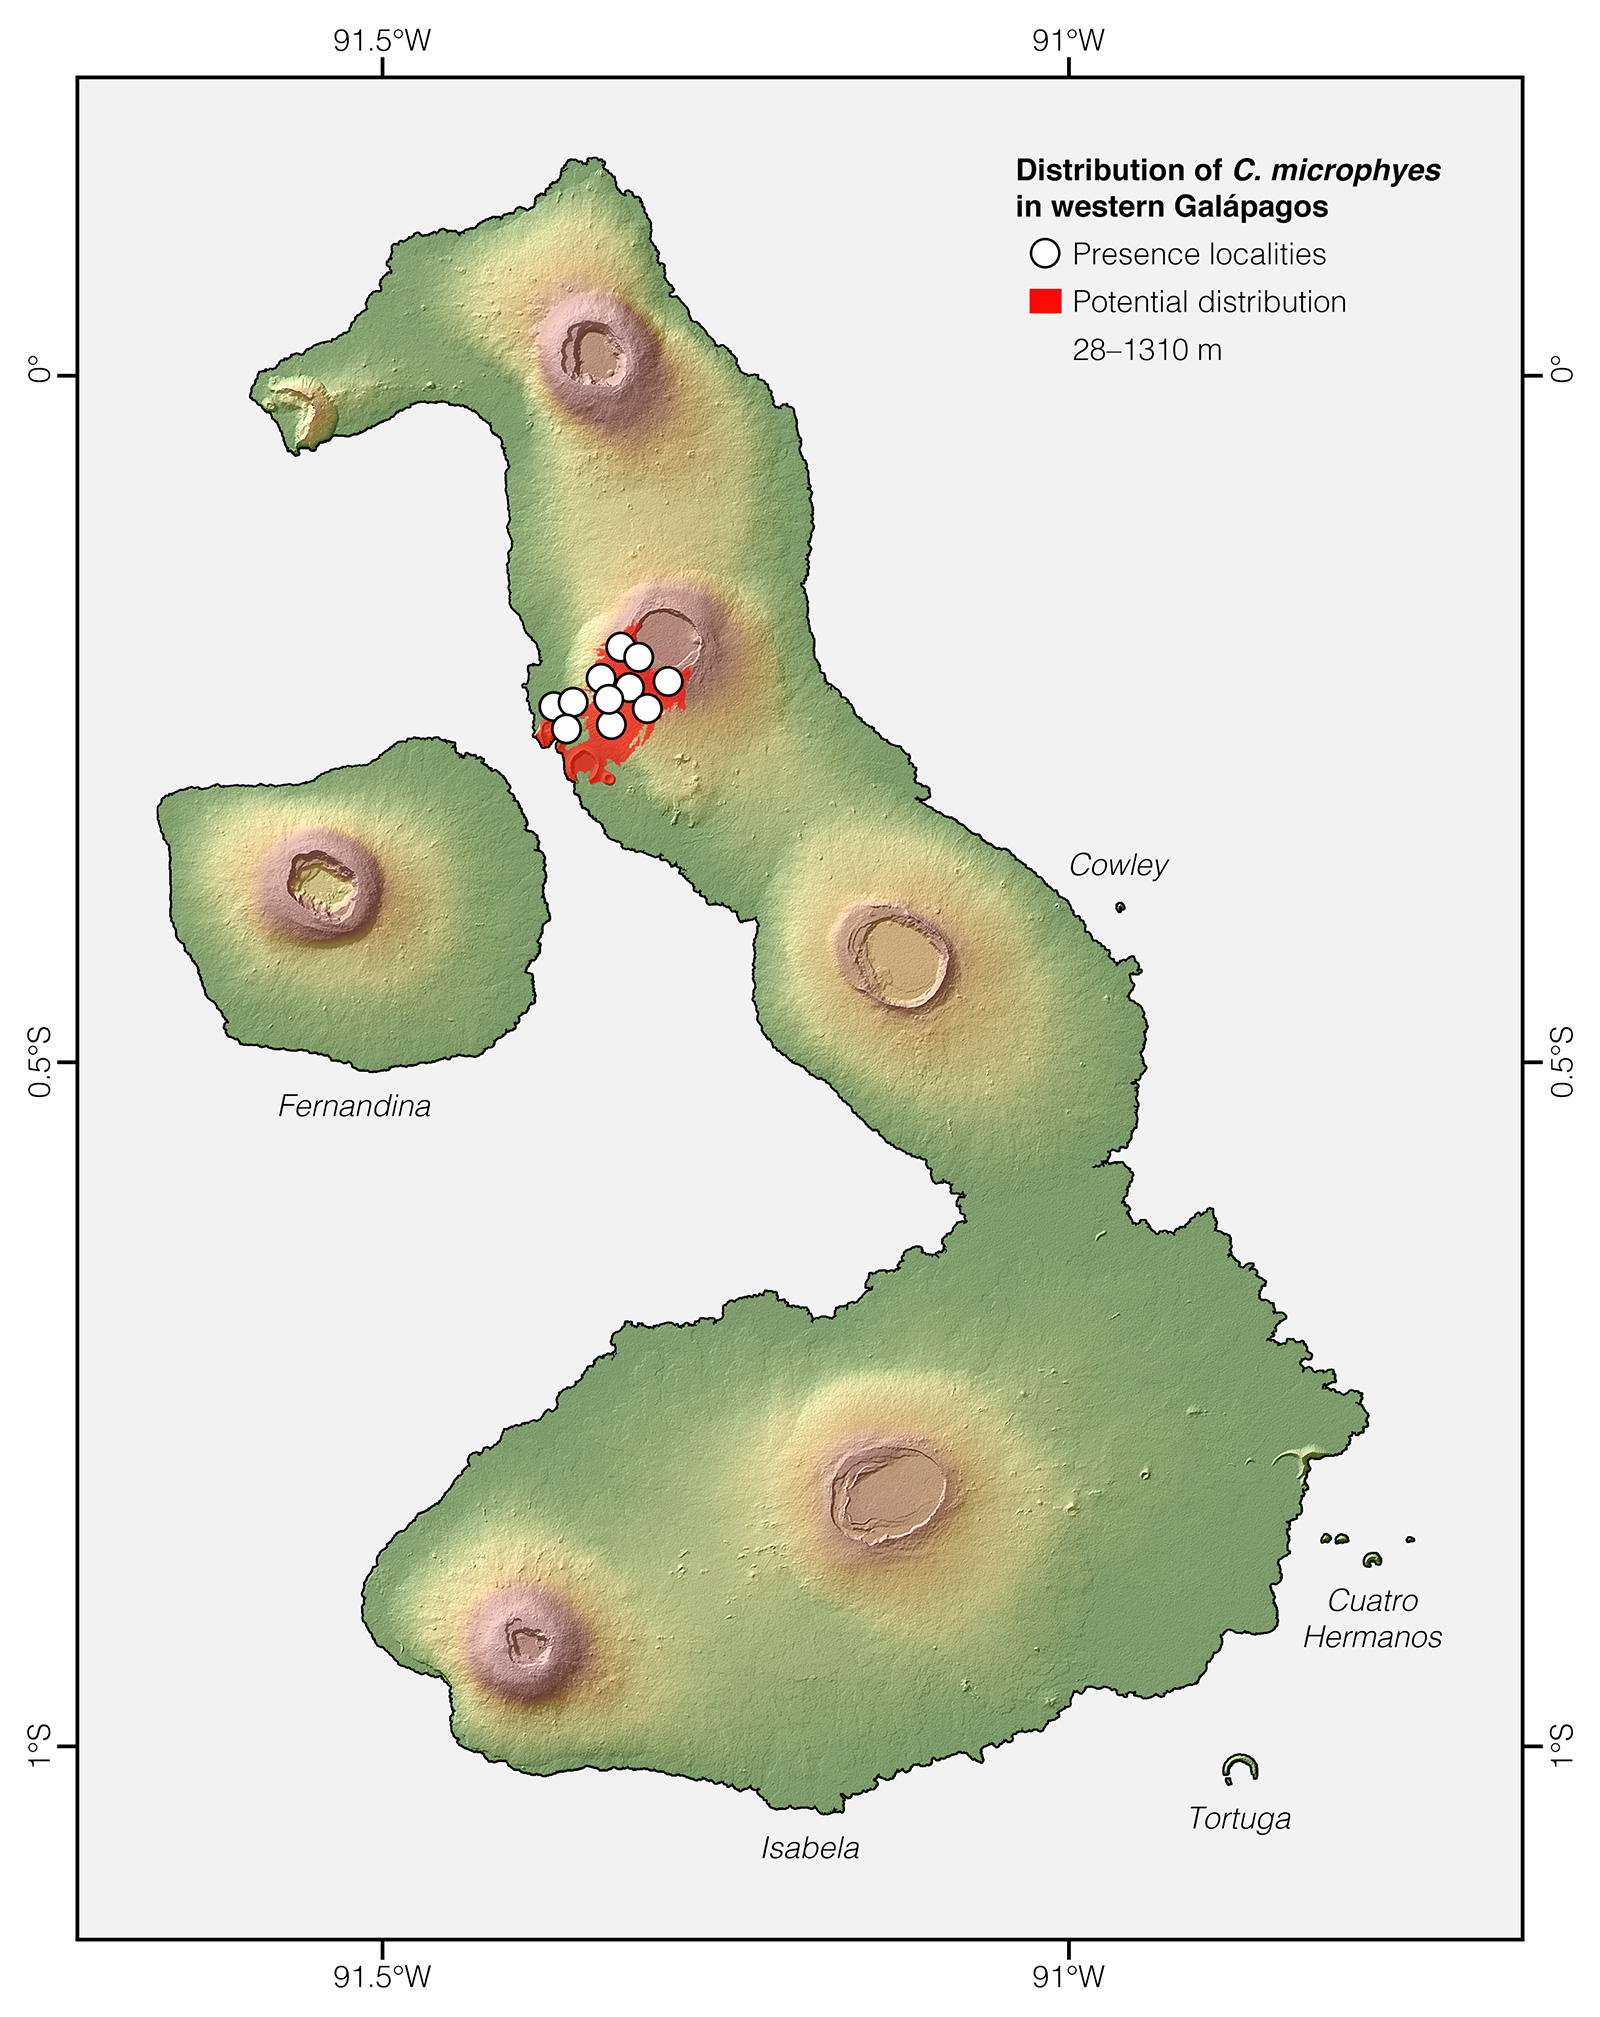 Distribution of Chelonoidis microphyes in western Galápagos